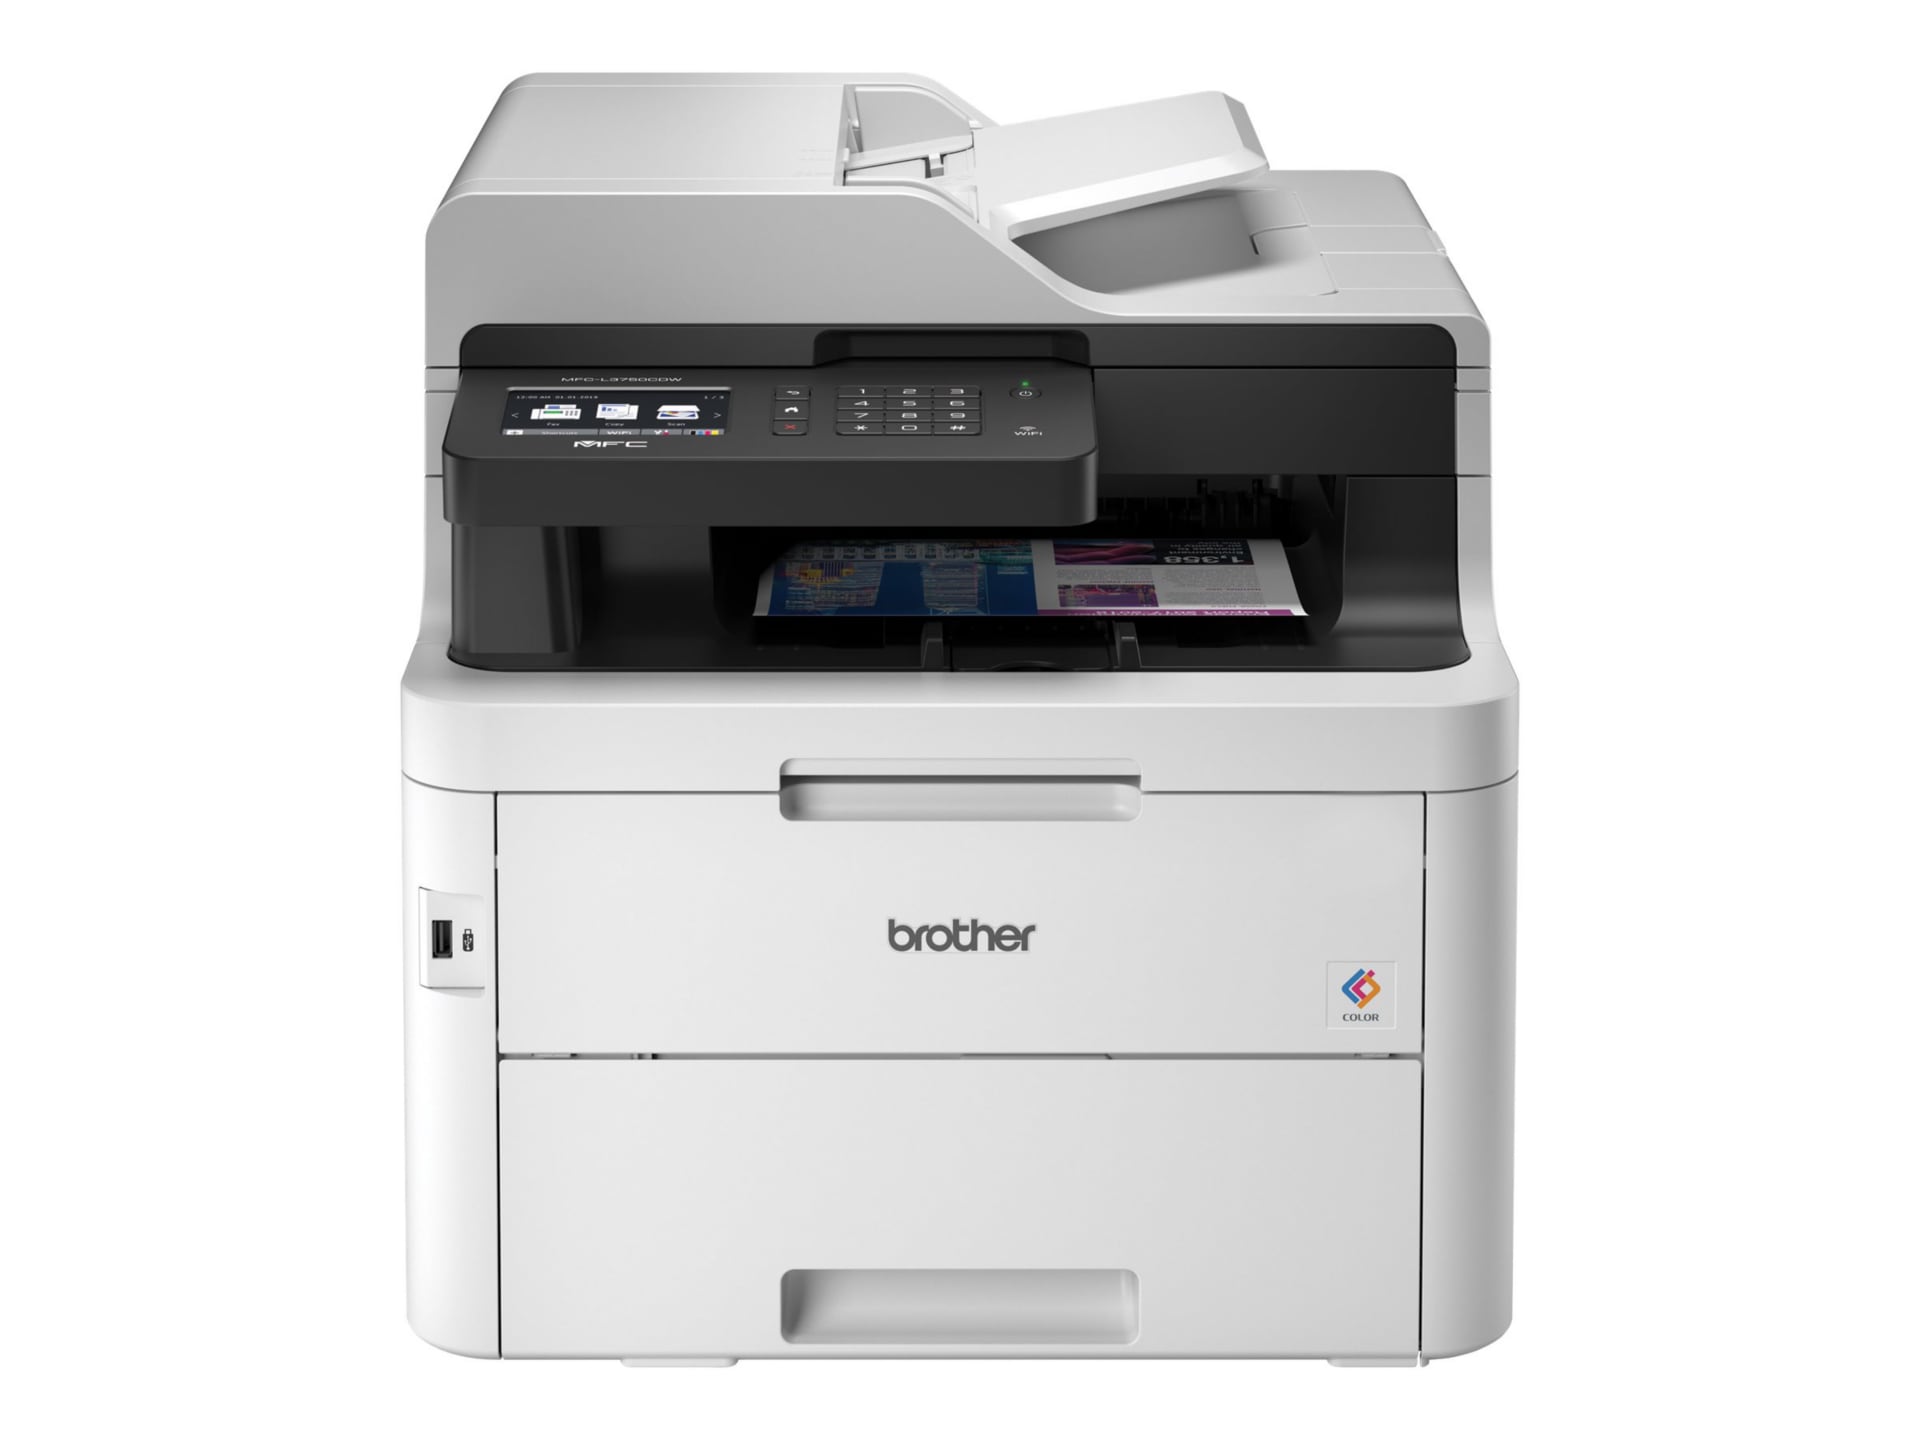 Brother MFC-L3750CDW - multifunction printer - color - MFC-L3750CDW - All-in-One Printers -